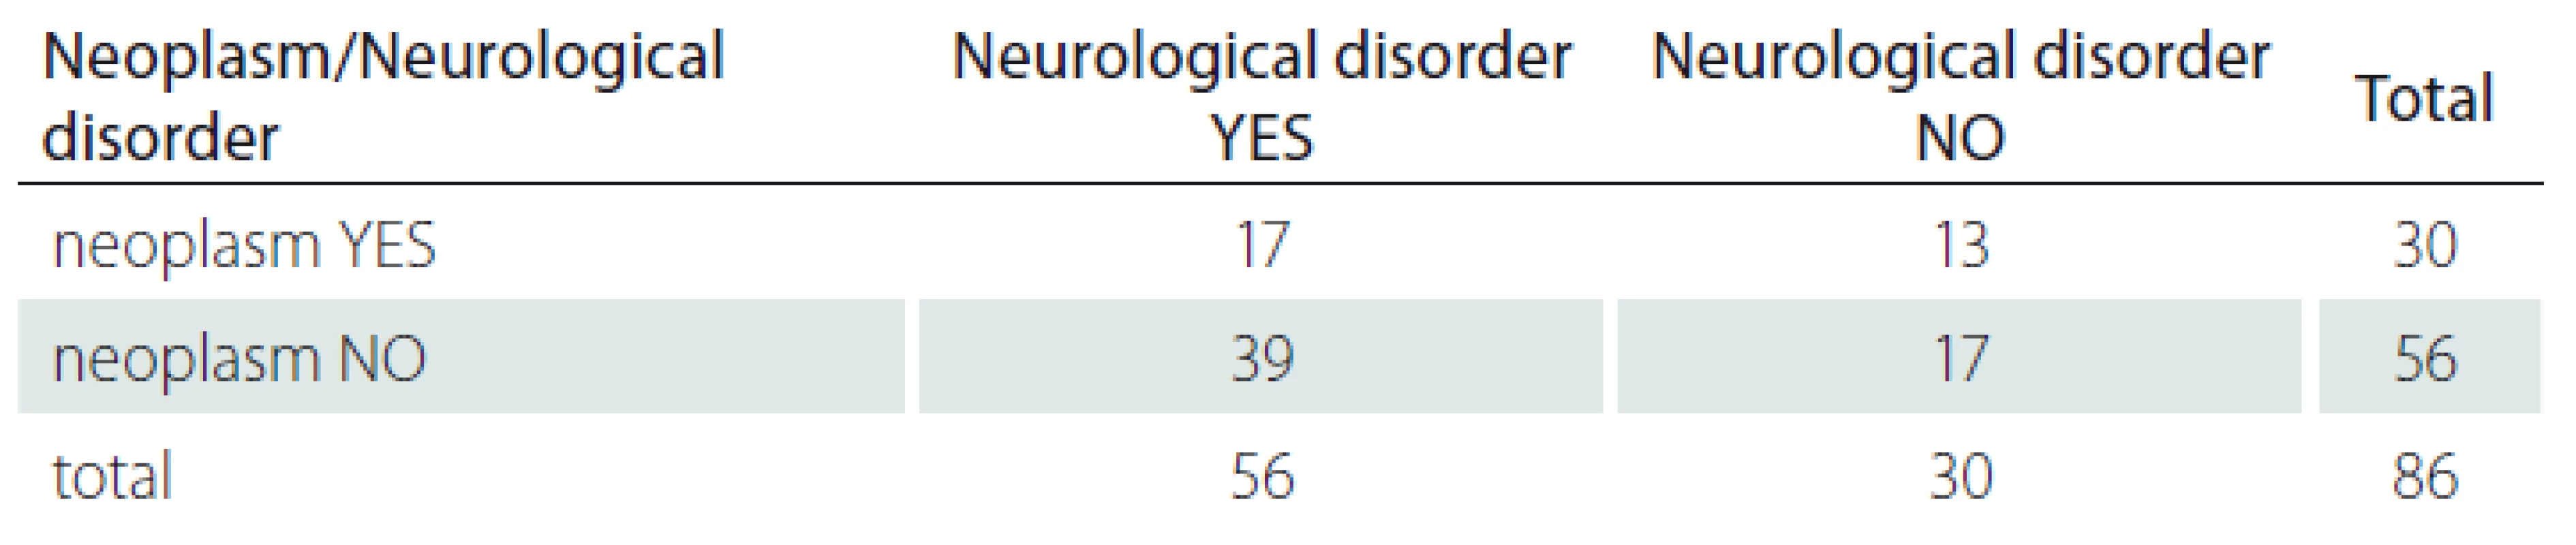 Neurological disorder and neoplasm.